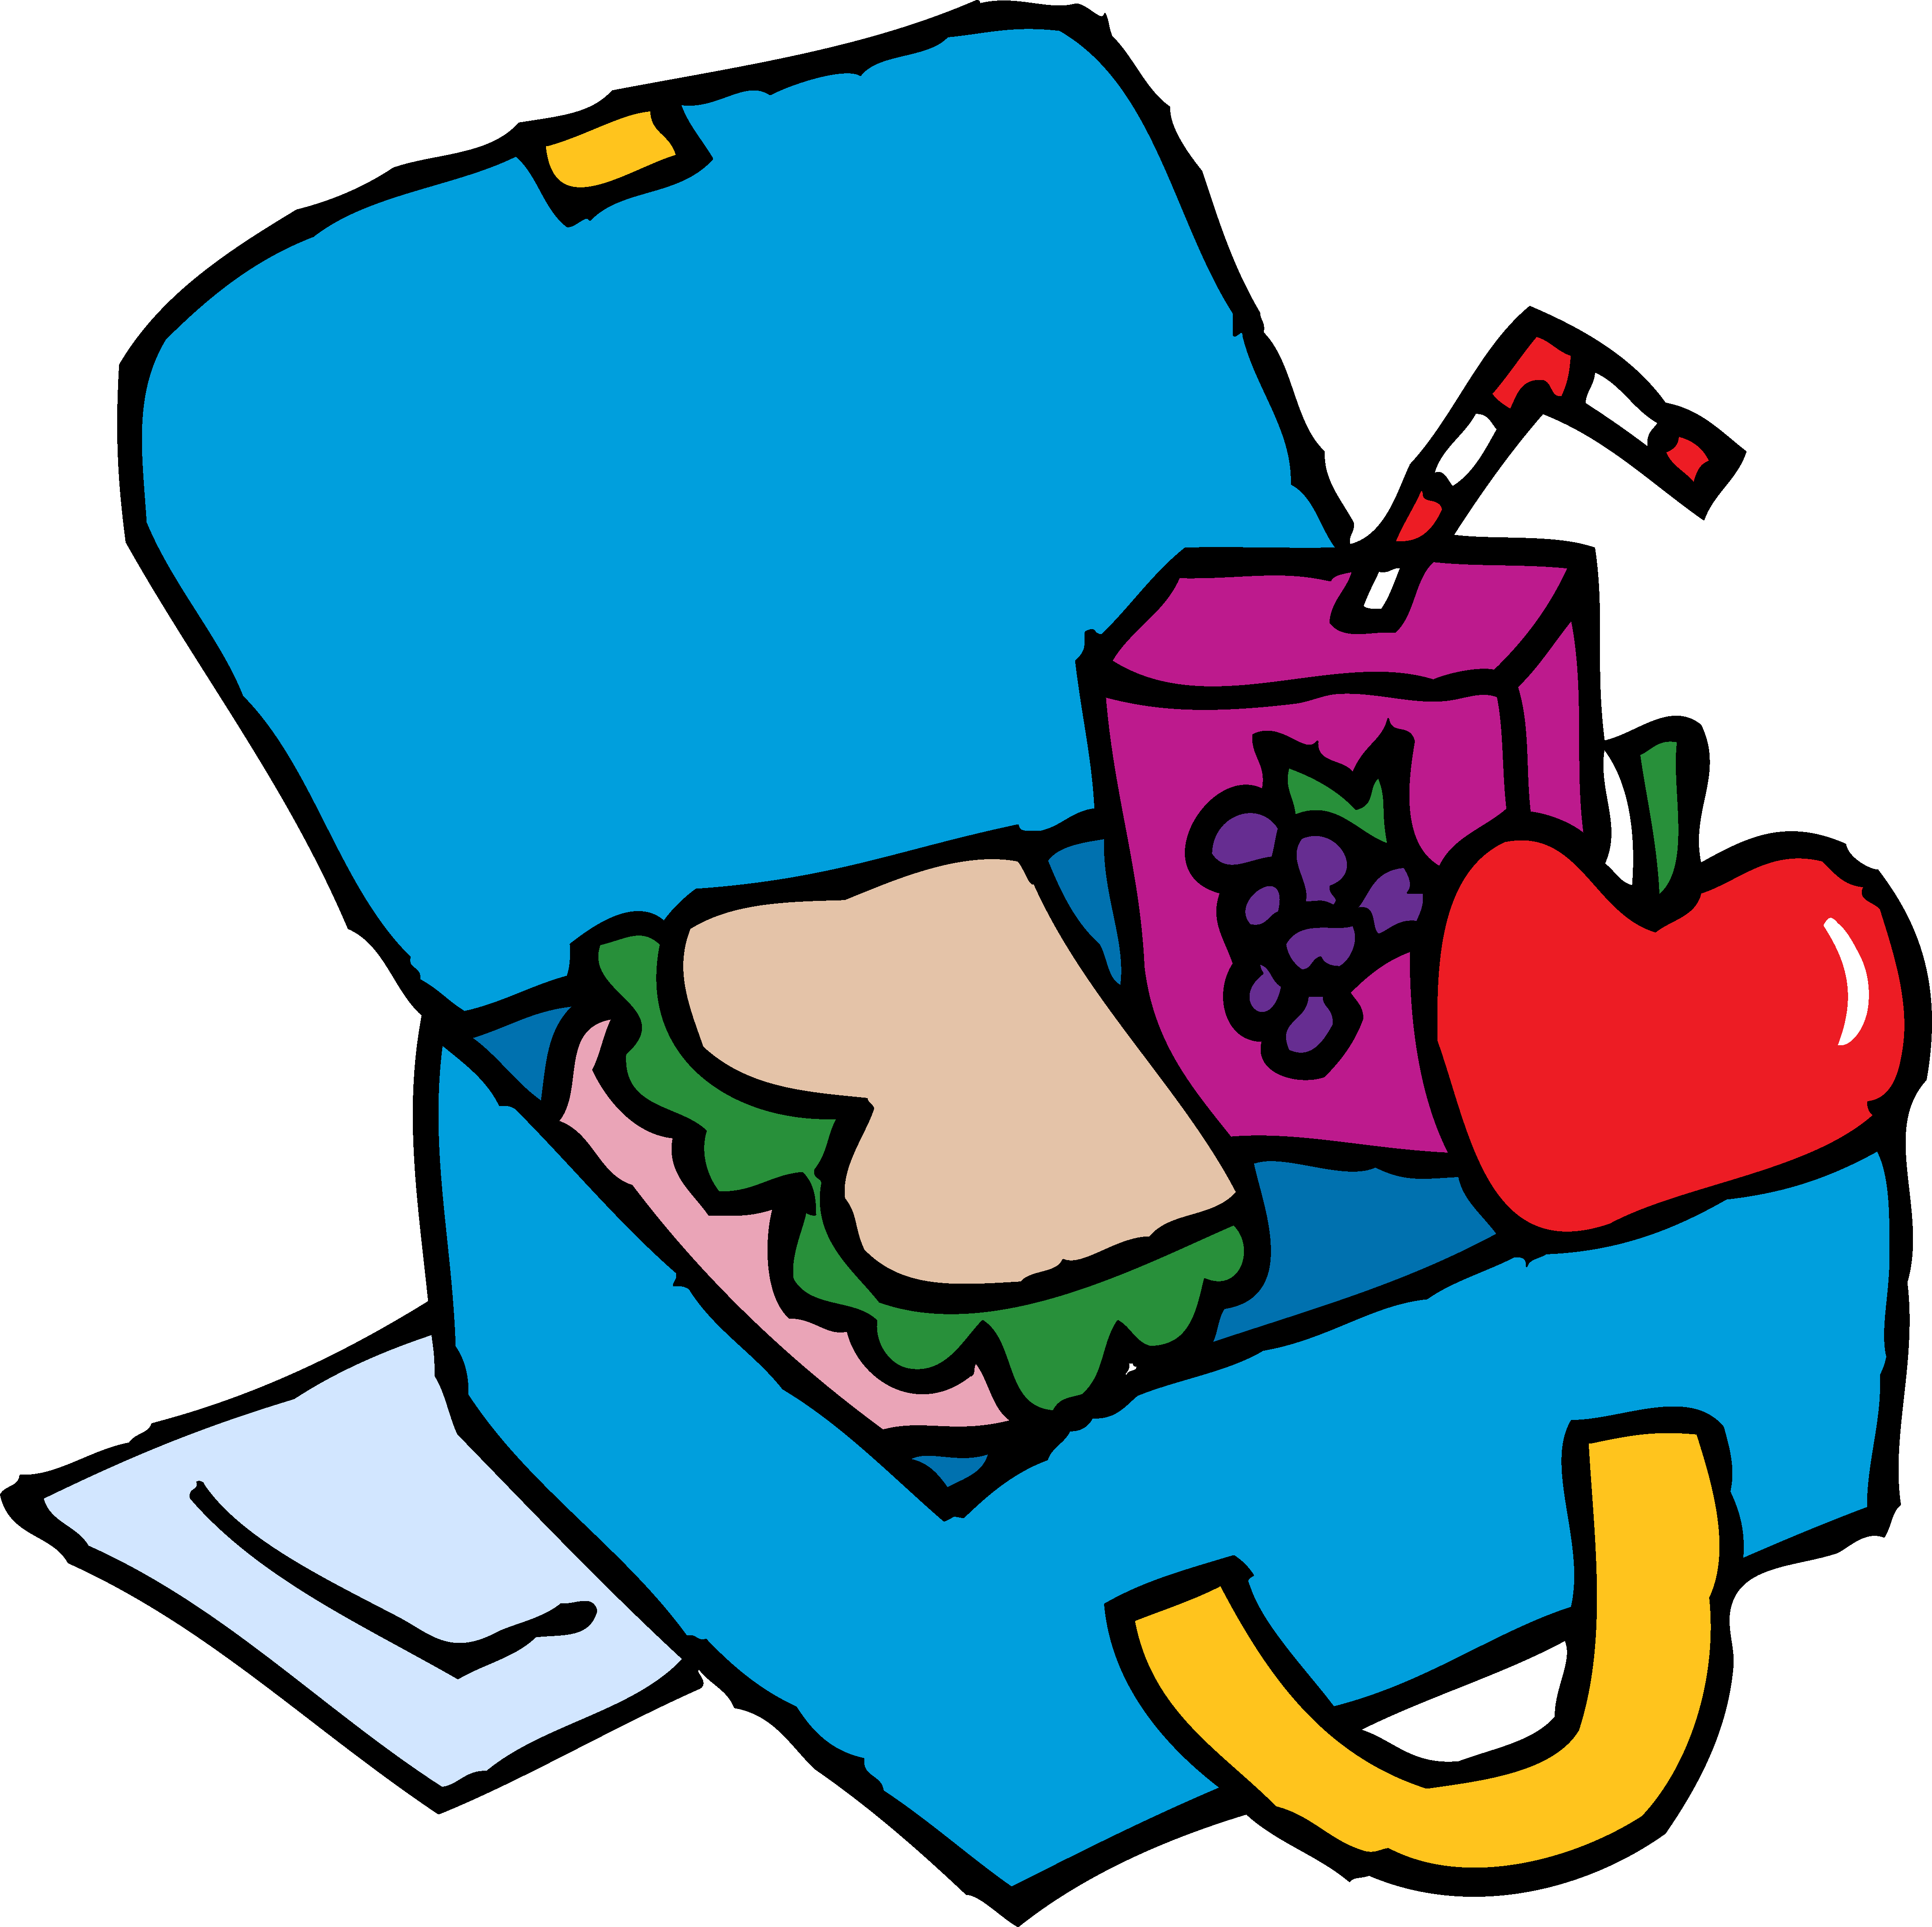 Lunchbox clipart free download on WebStockReview